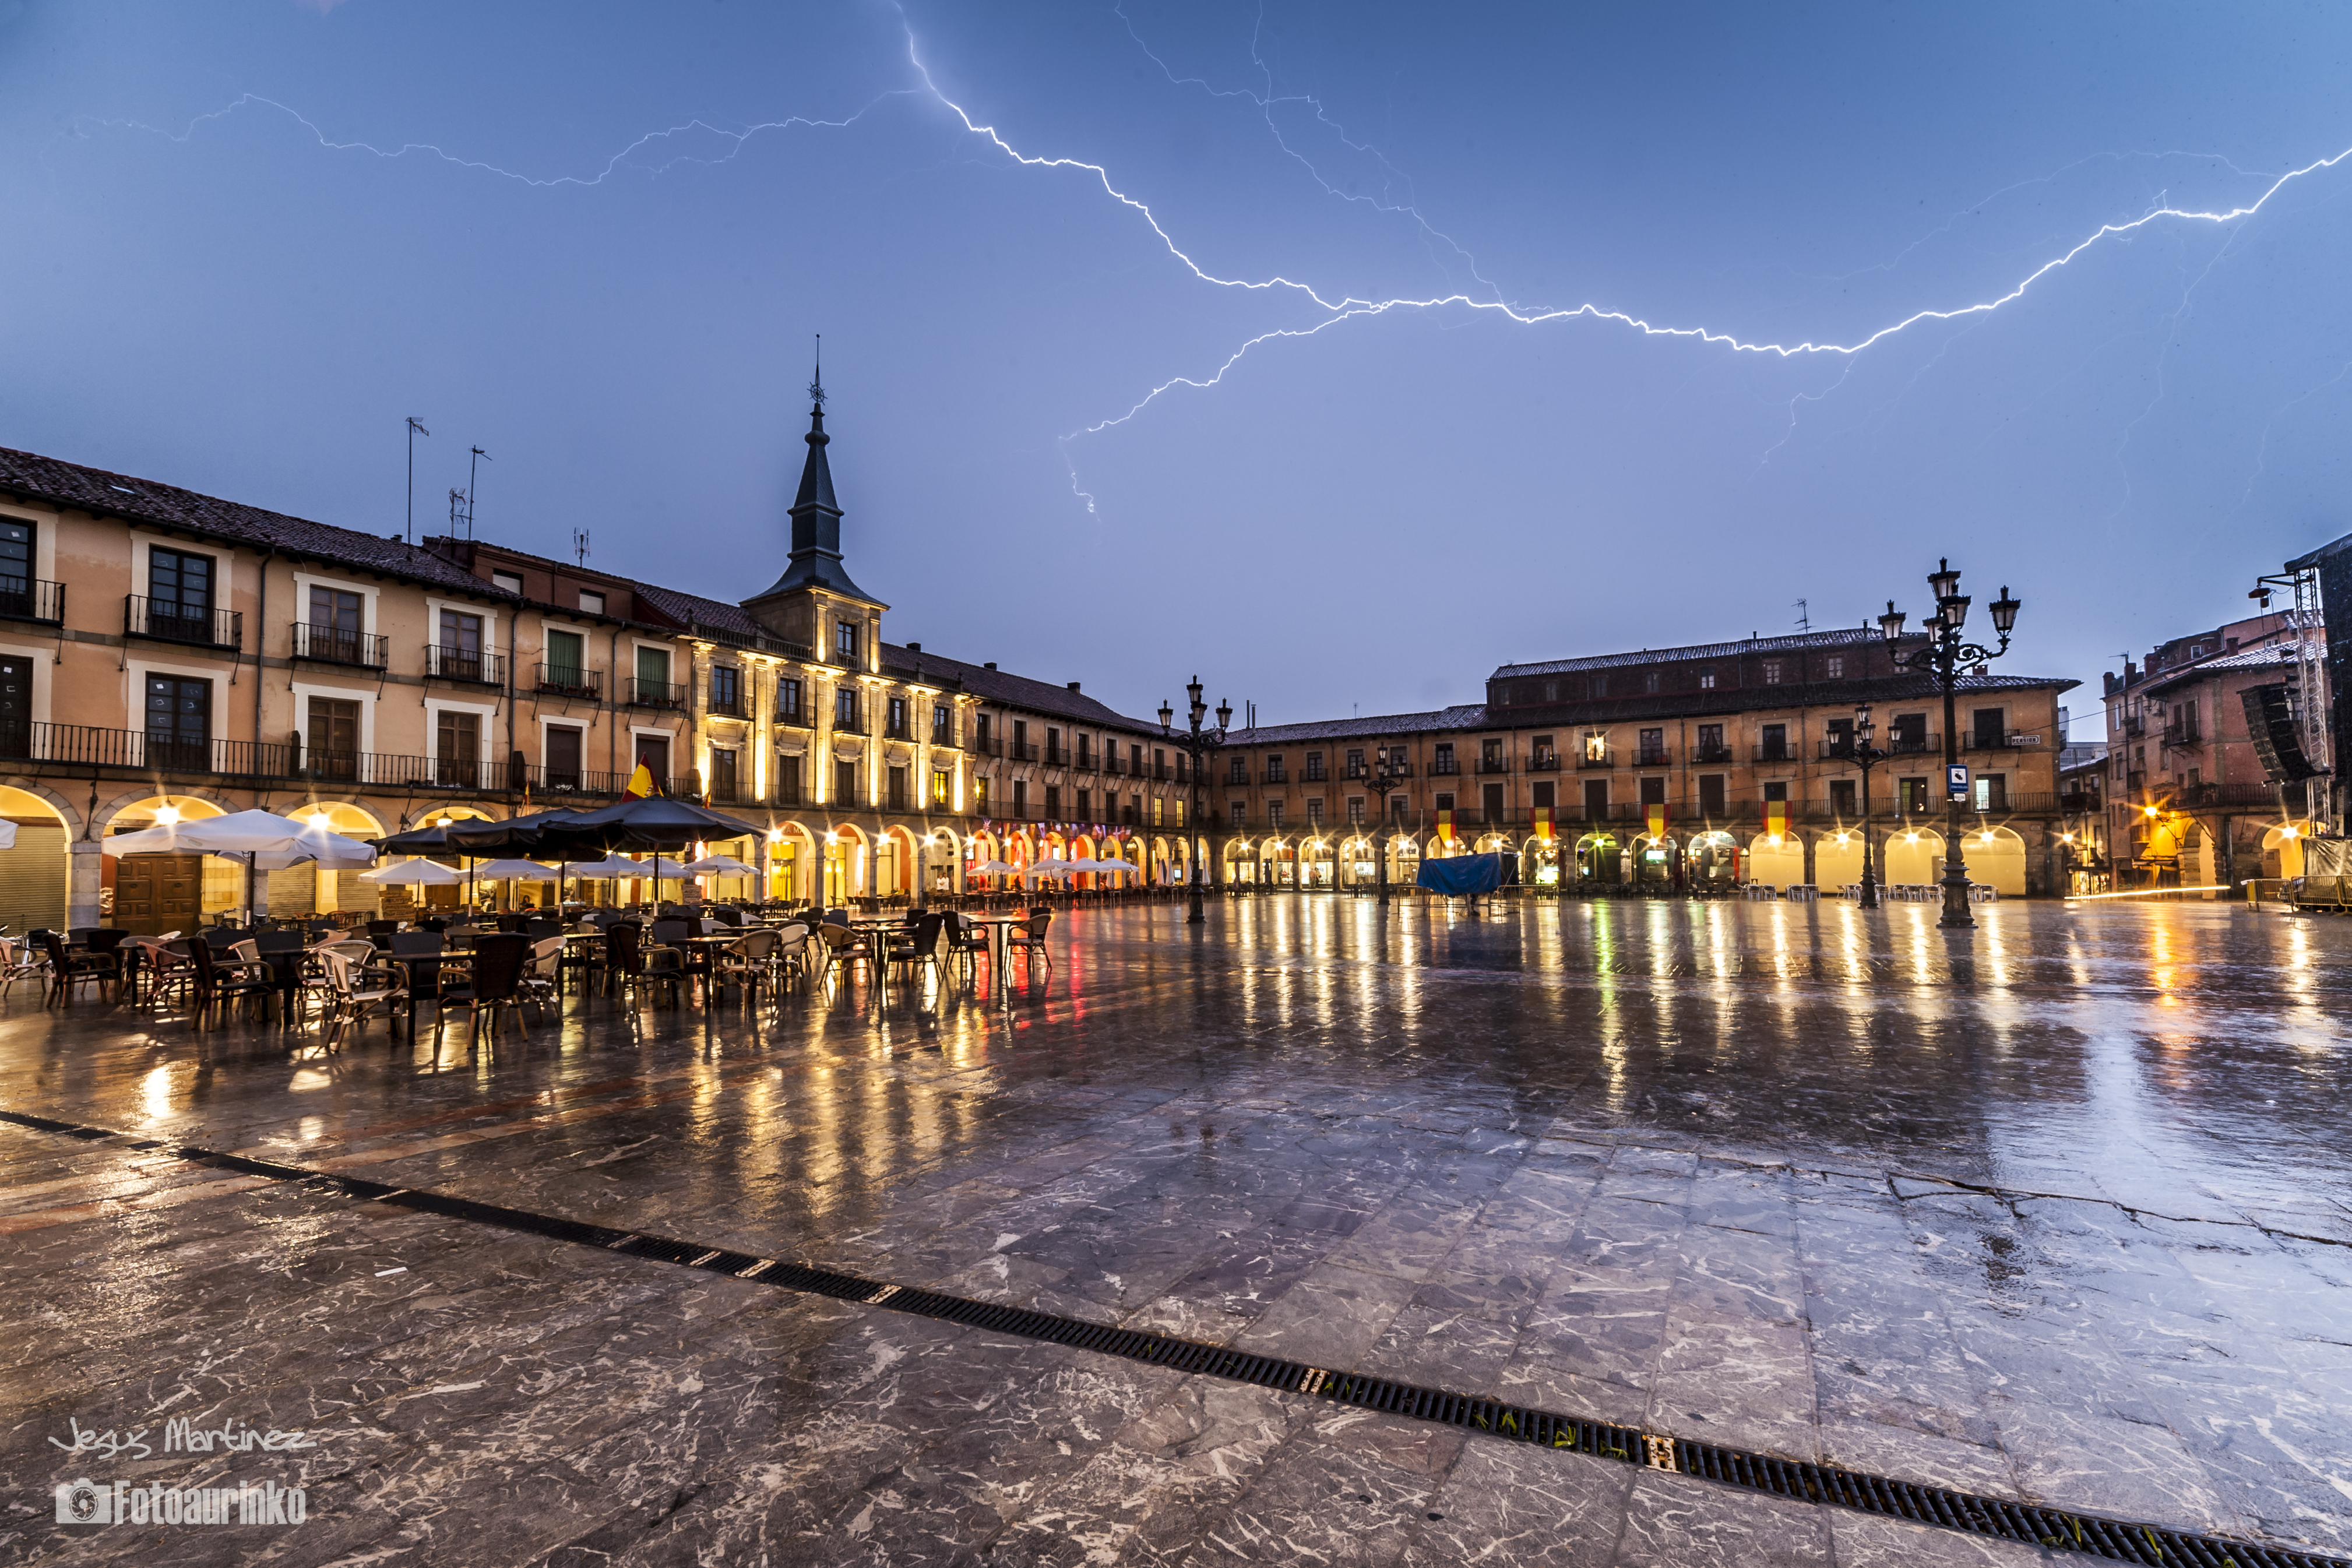 Leon Mayor Square in a storm day